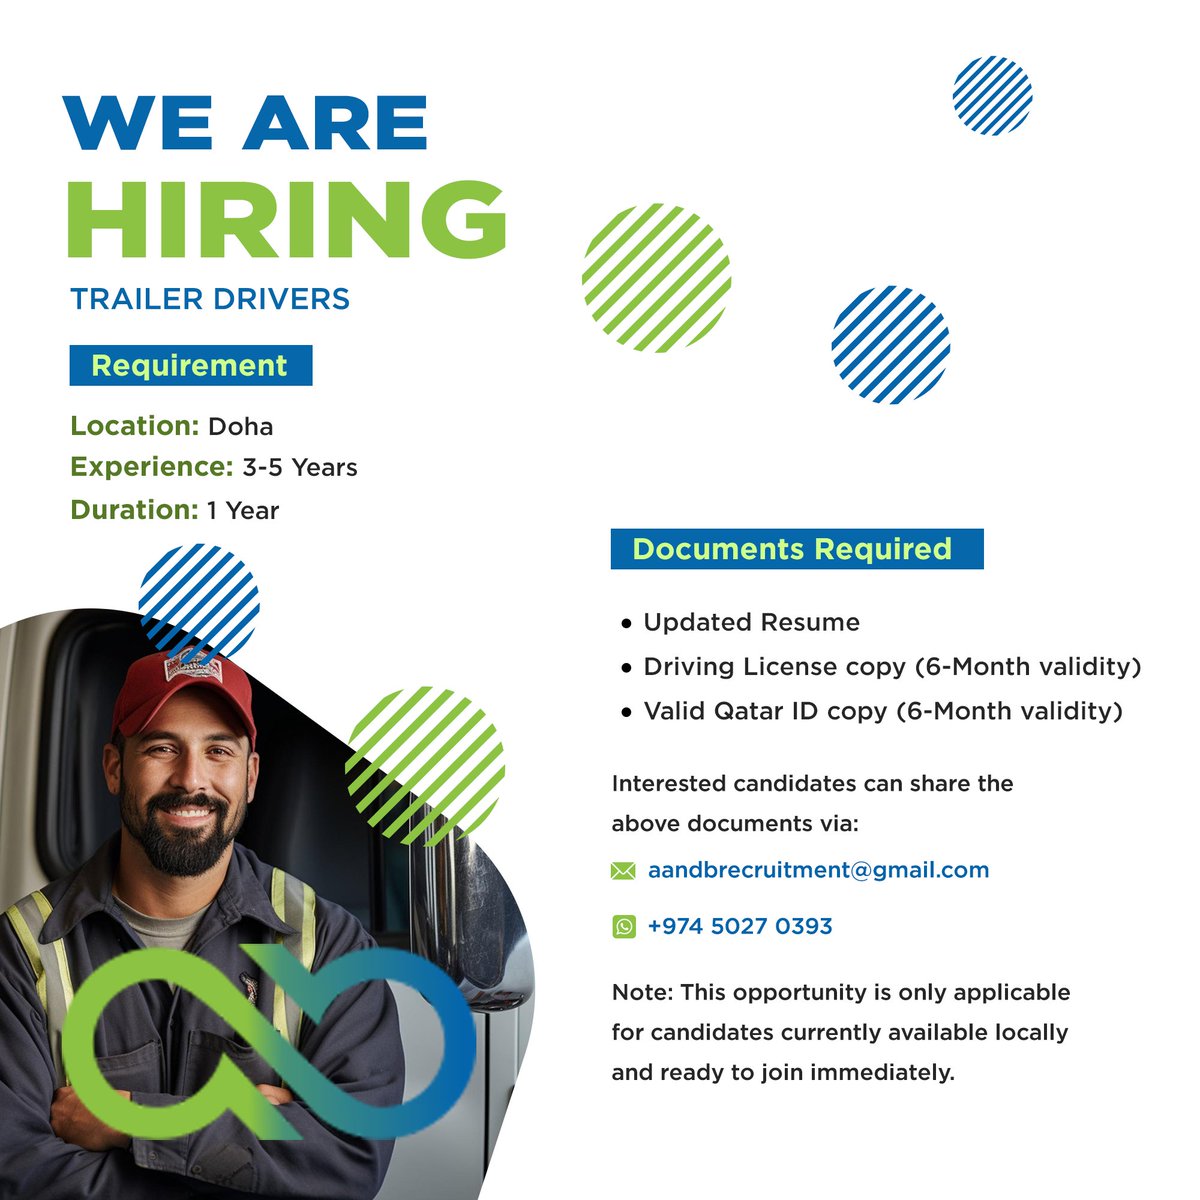 We are hiring a Trailer Driver in Doha, Qatar with a minimum of 3 years of experience.
To apply, send your resume to aandbrecruitment@gmail.com or contact +974 - 66306543
.
.
.
#AandBprojects #Qatar #OilandGasConvention2024